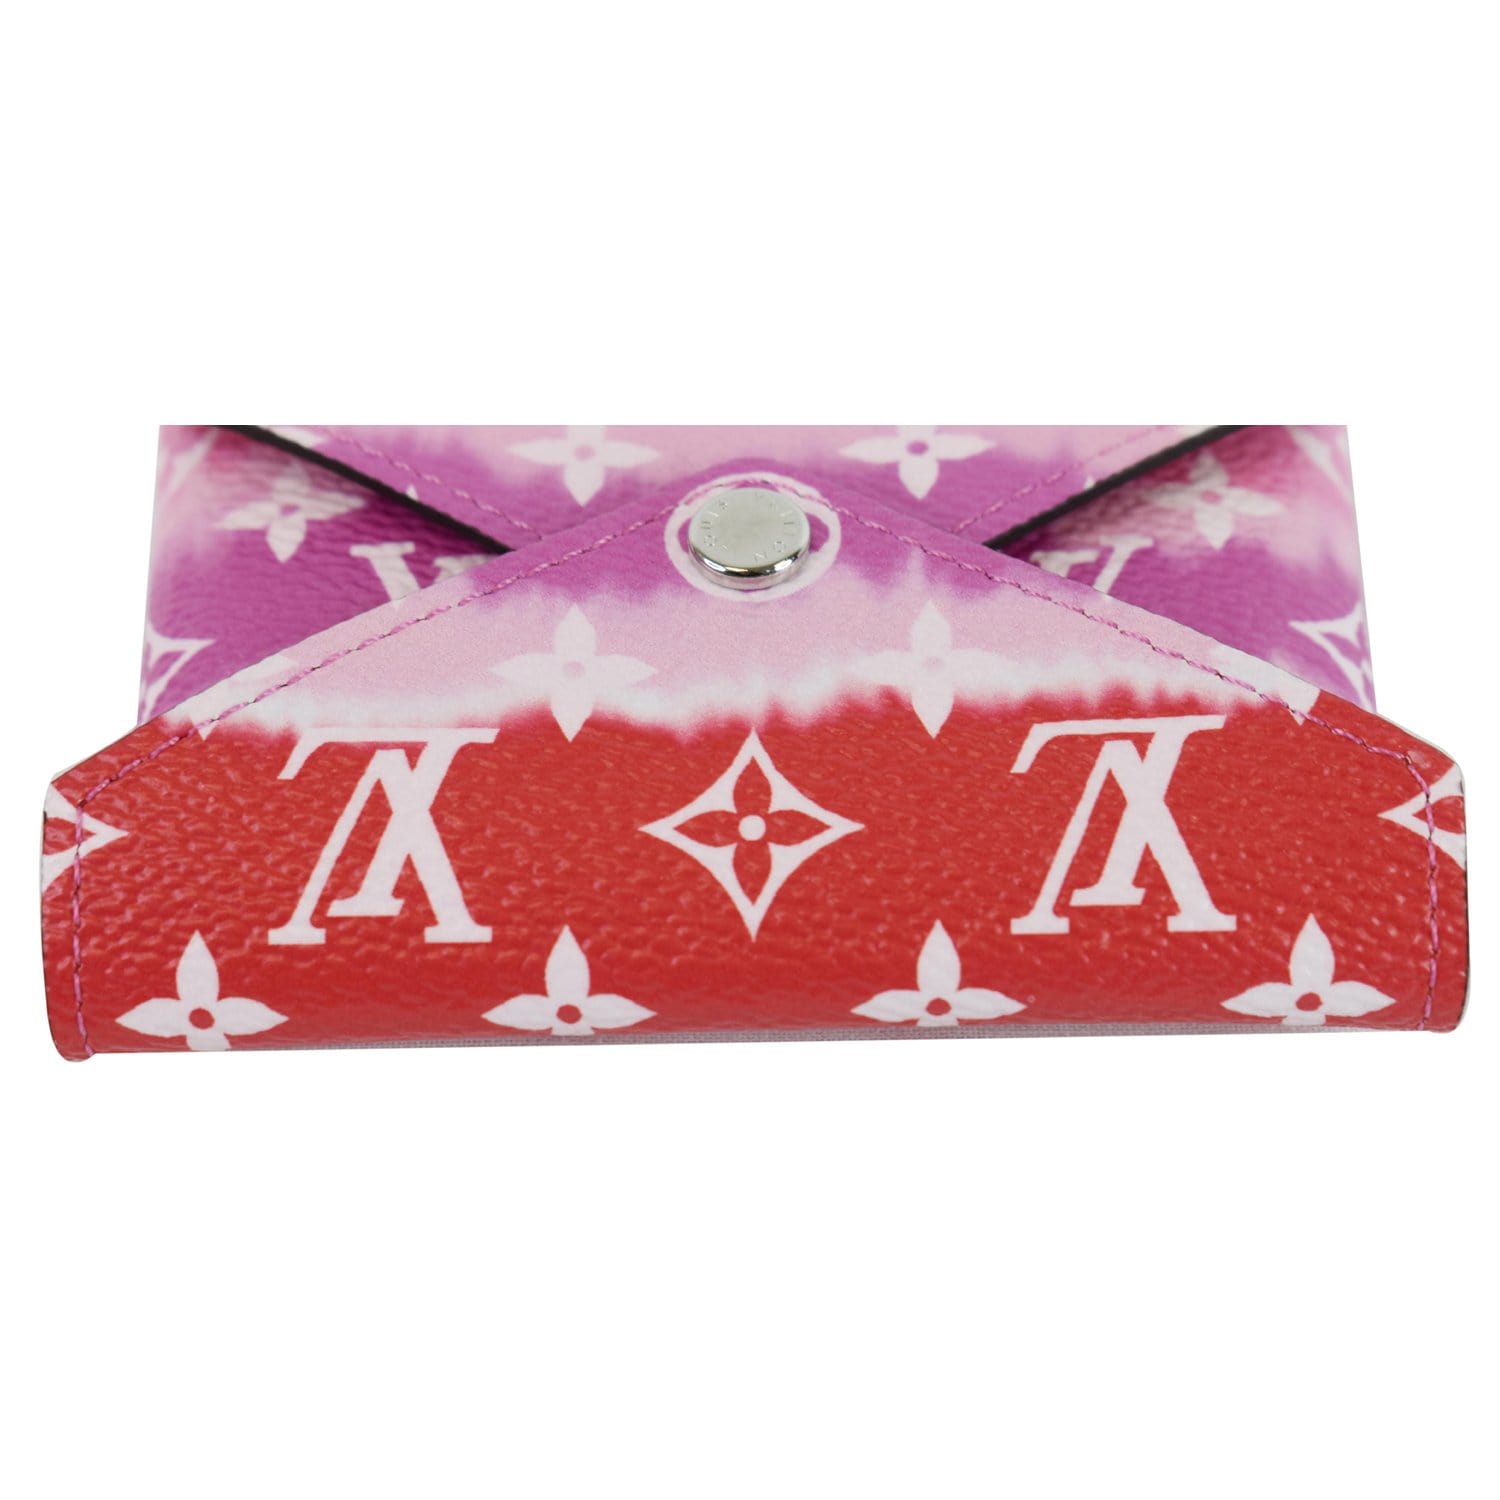 LOUIS VUITTON SMALL ESCALE POCHETTE KIRIGAMI RED/PINK POUCH ROUGE MONOGRAM